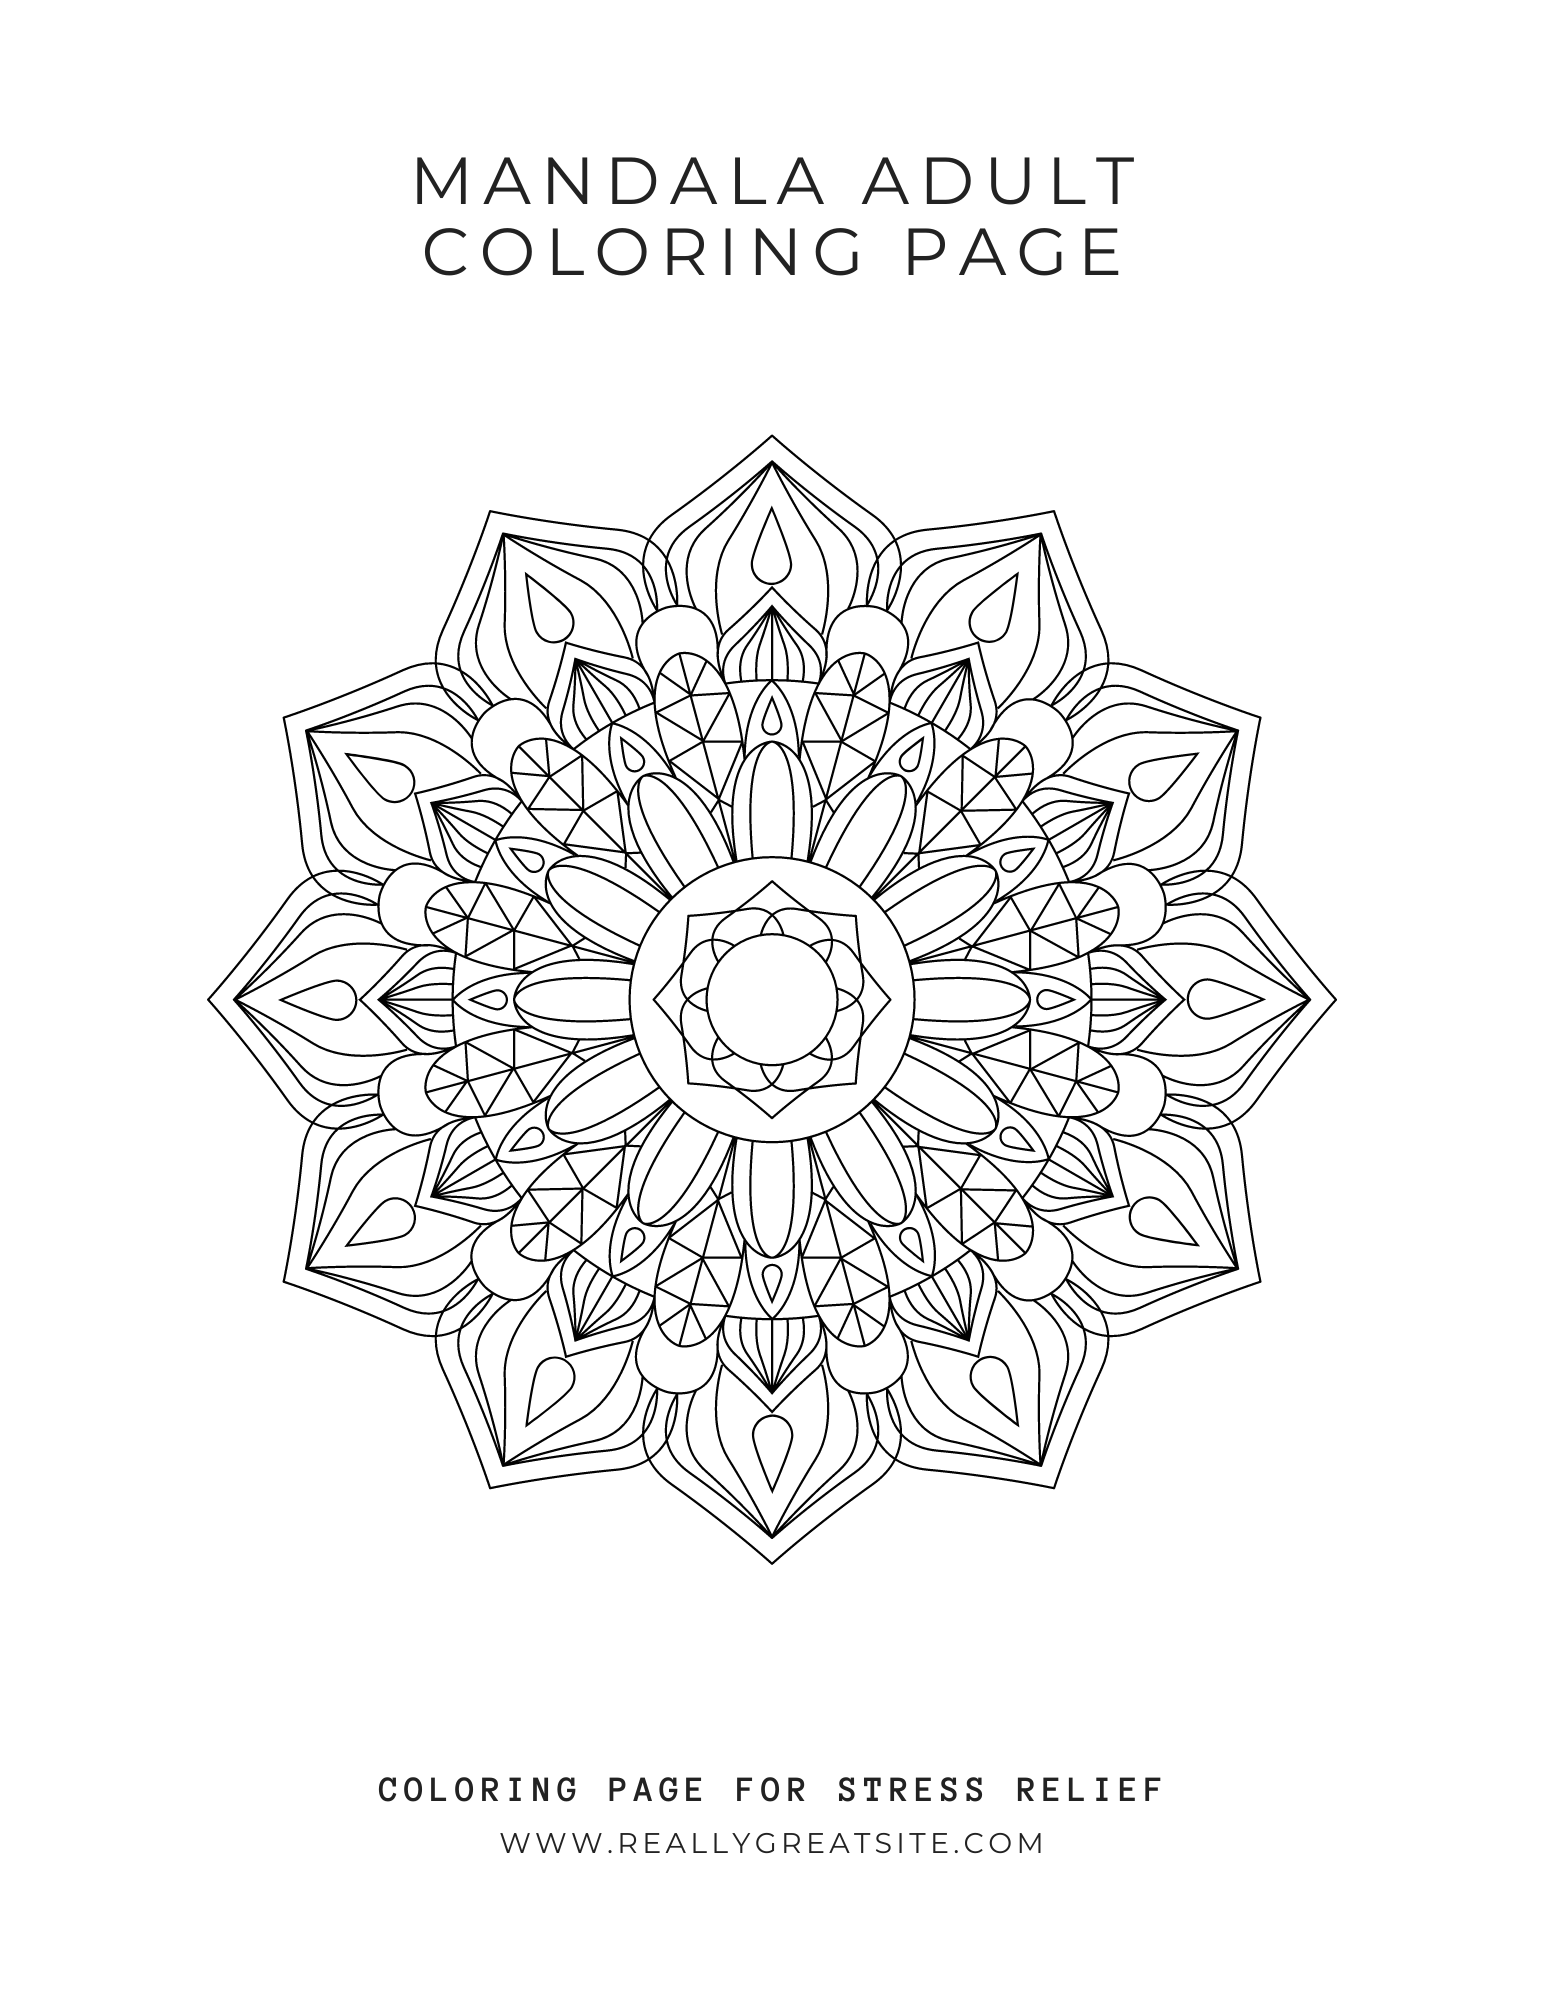 Mandala coloring page for stress relief